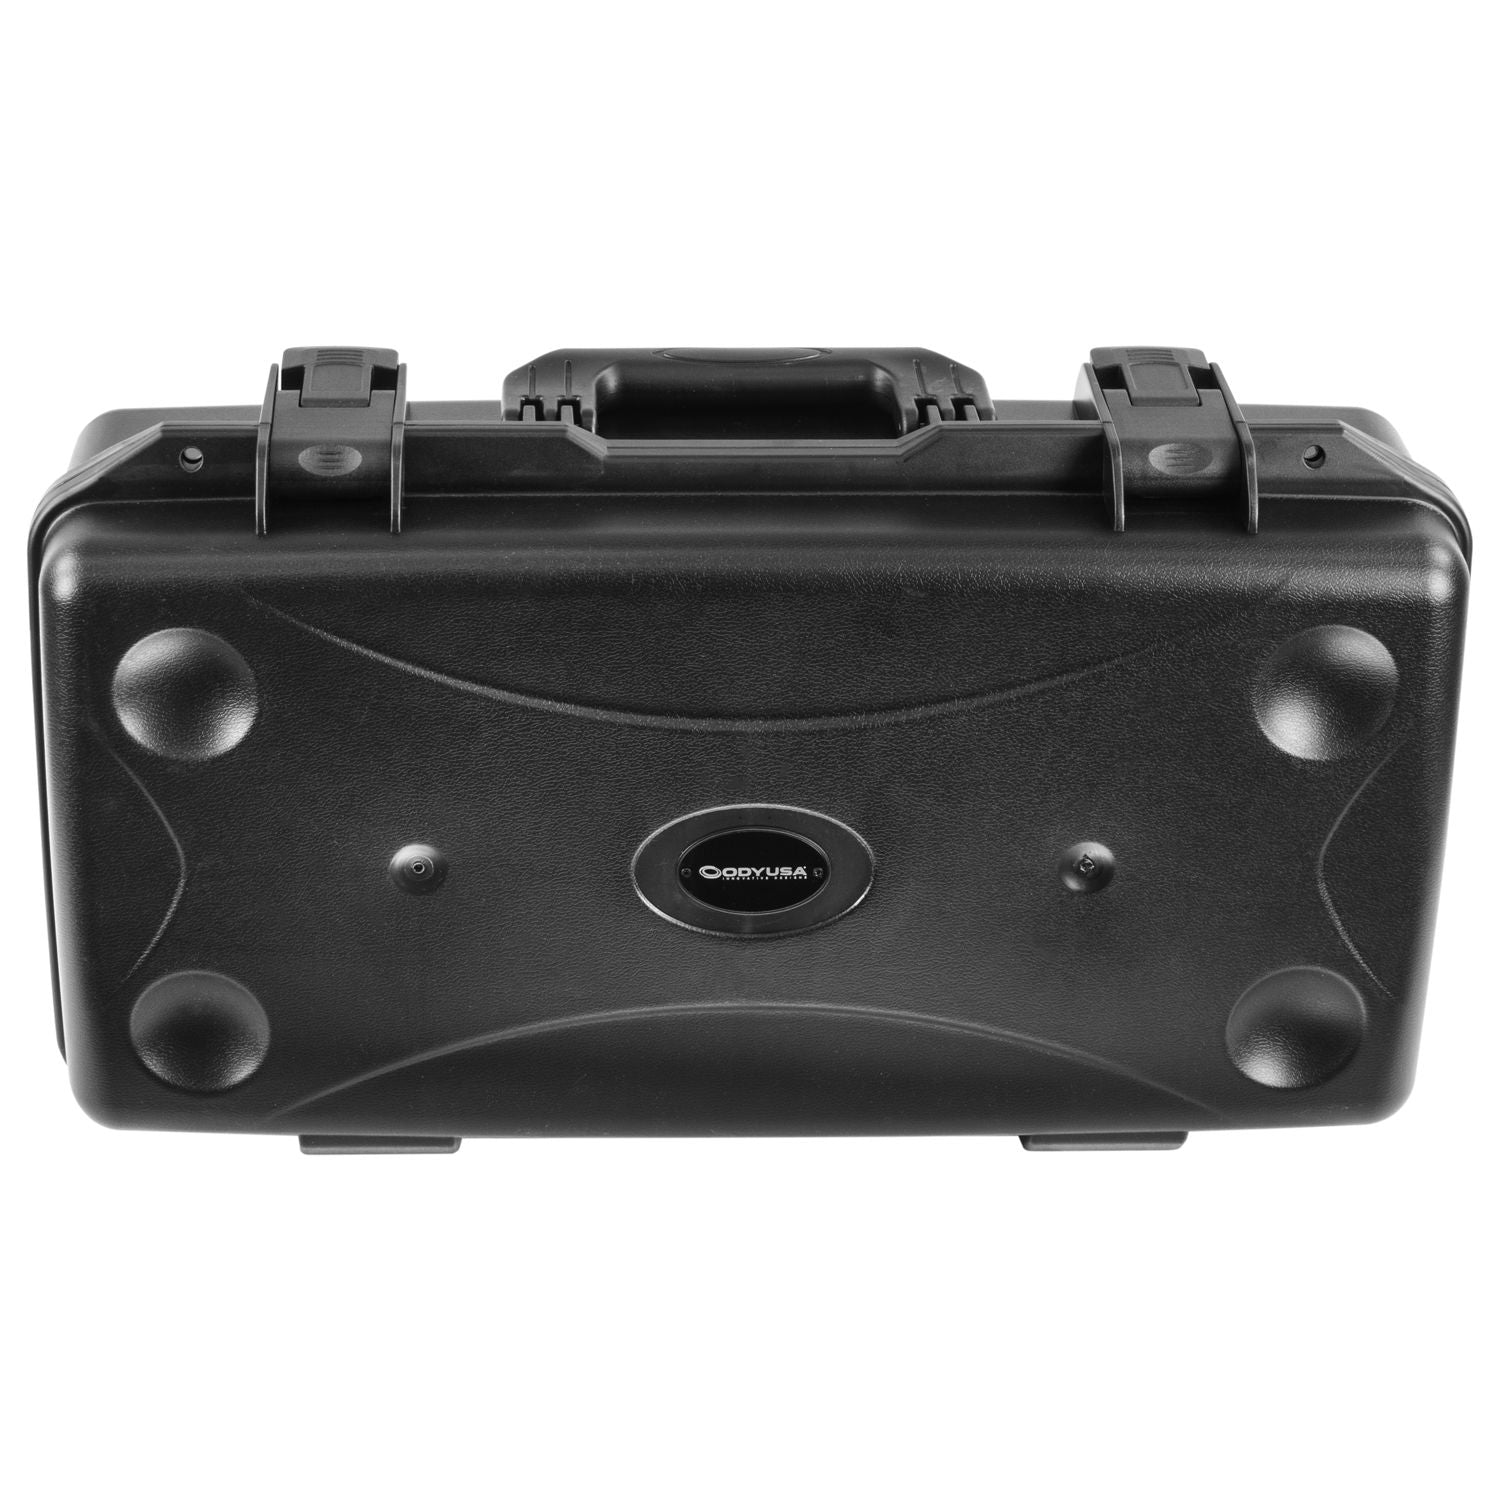 Odyssey VU221006 Bottom Interior with Pluck Foams Injection Molded Utility Case - Hollywood DJ